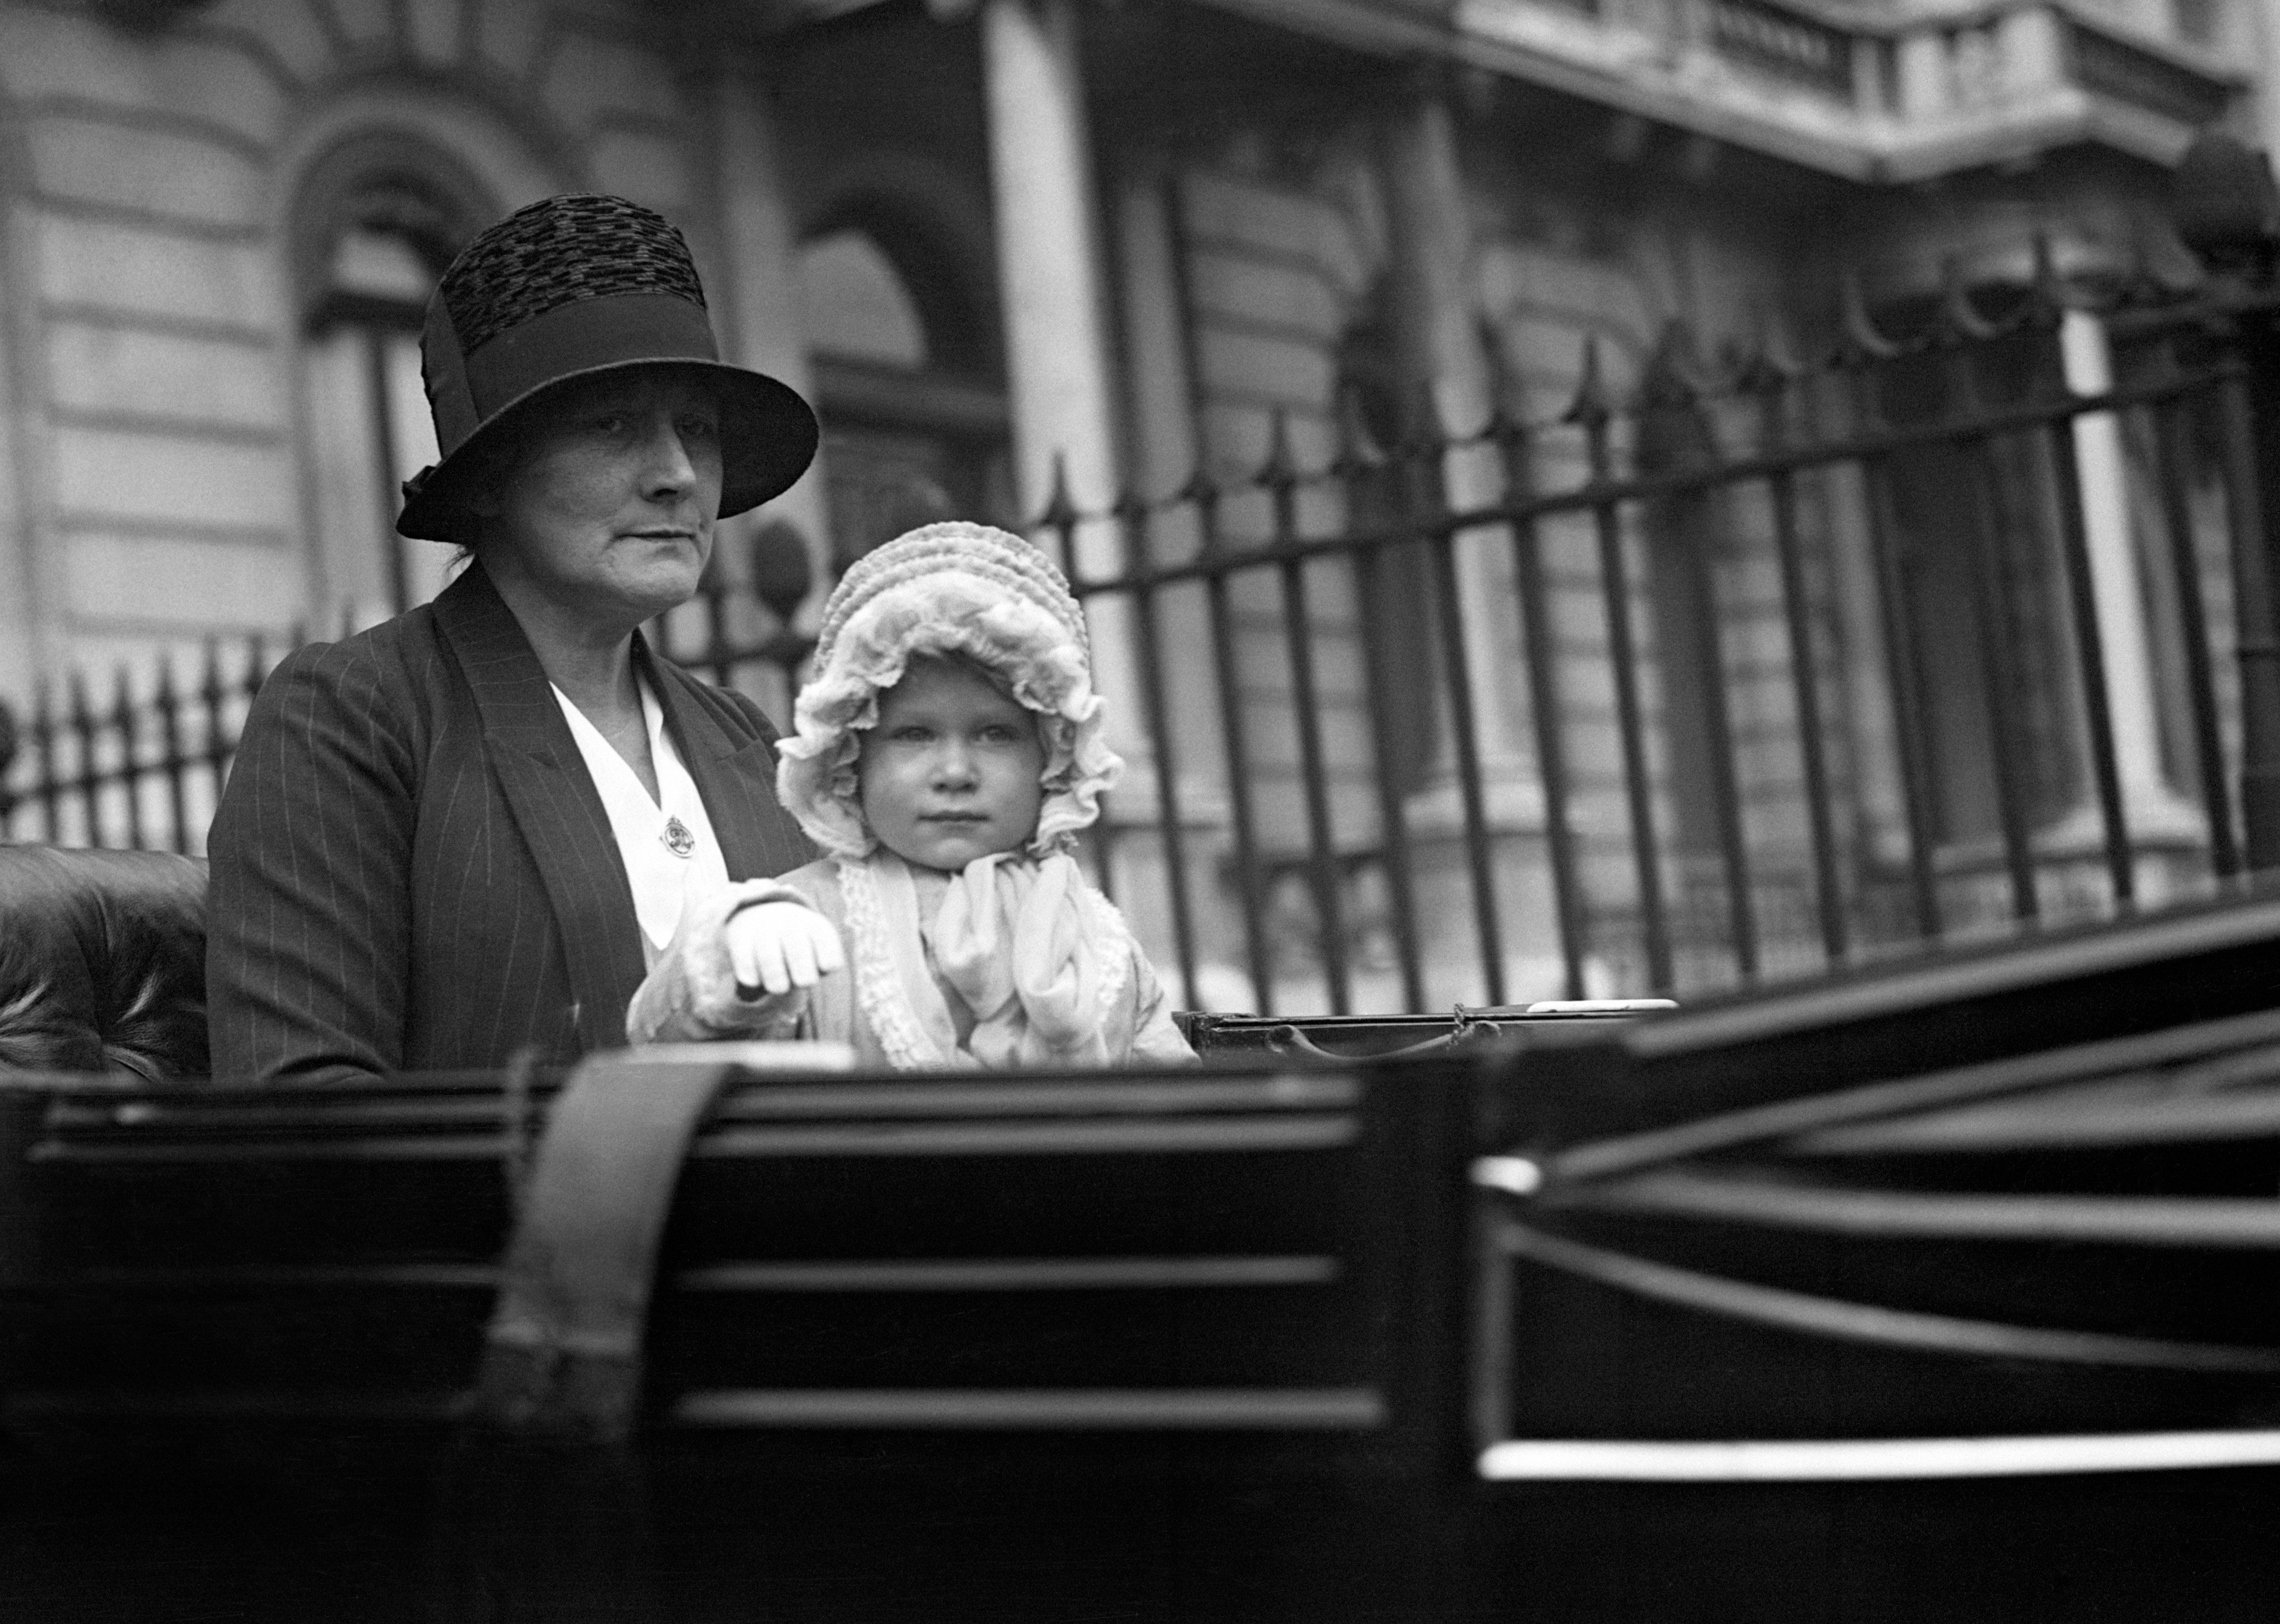 Little Princess Elizabeth waves at the crowds on Picadilly as she makes her way home from a carriage ride around Hyde Park